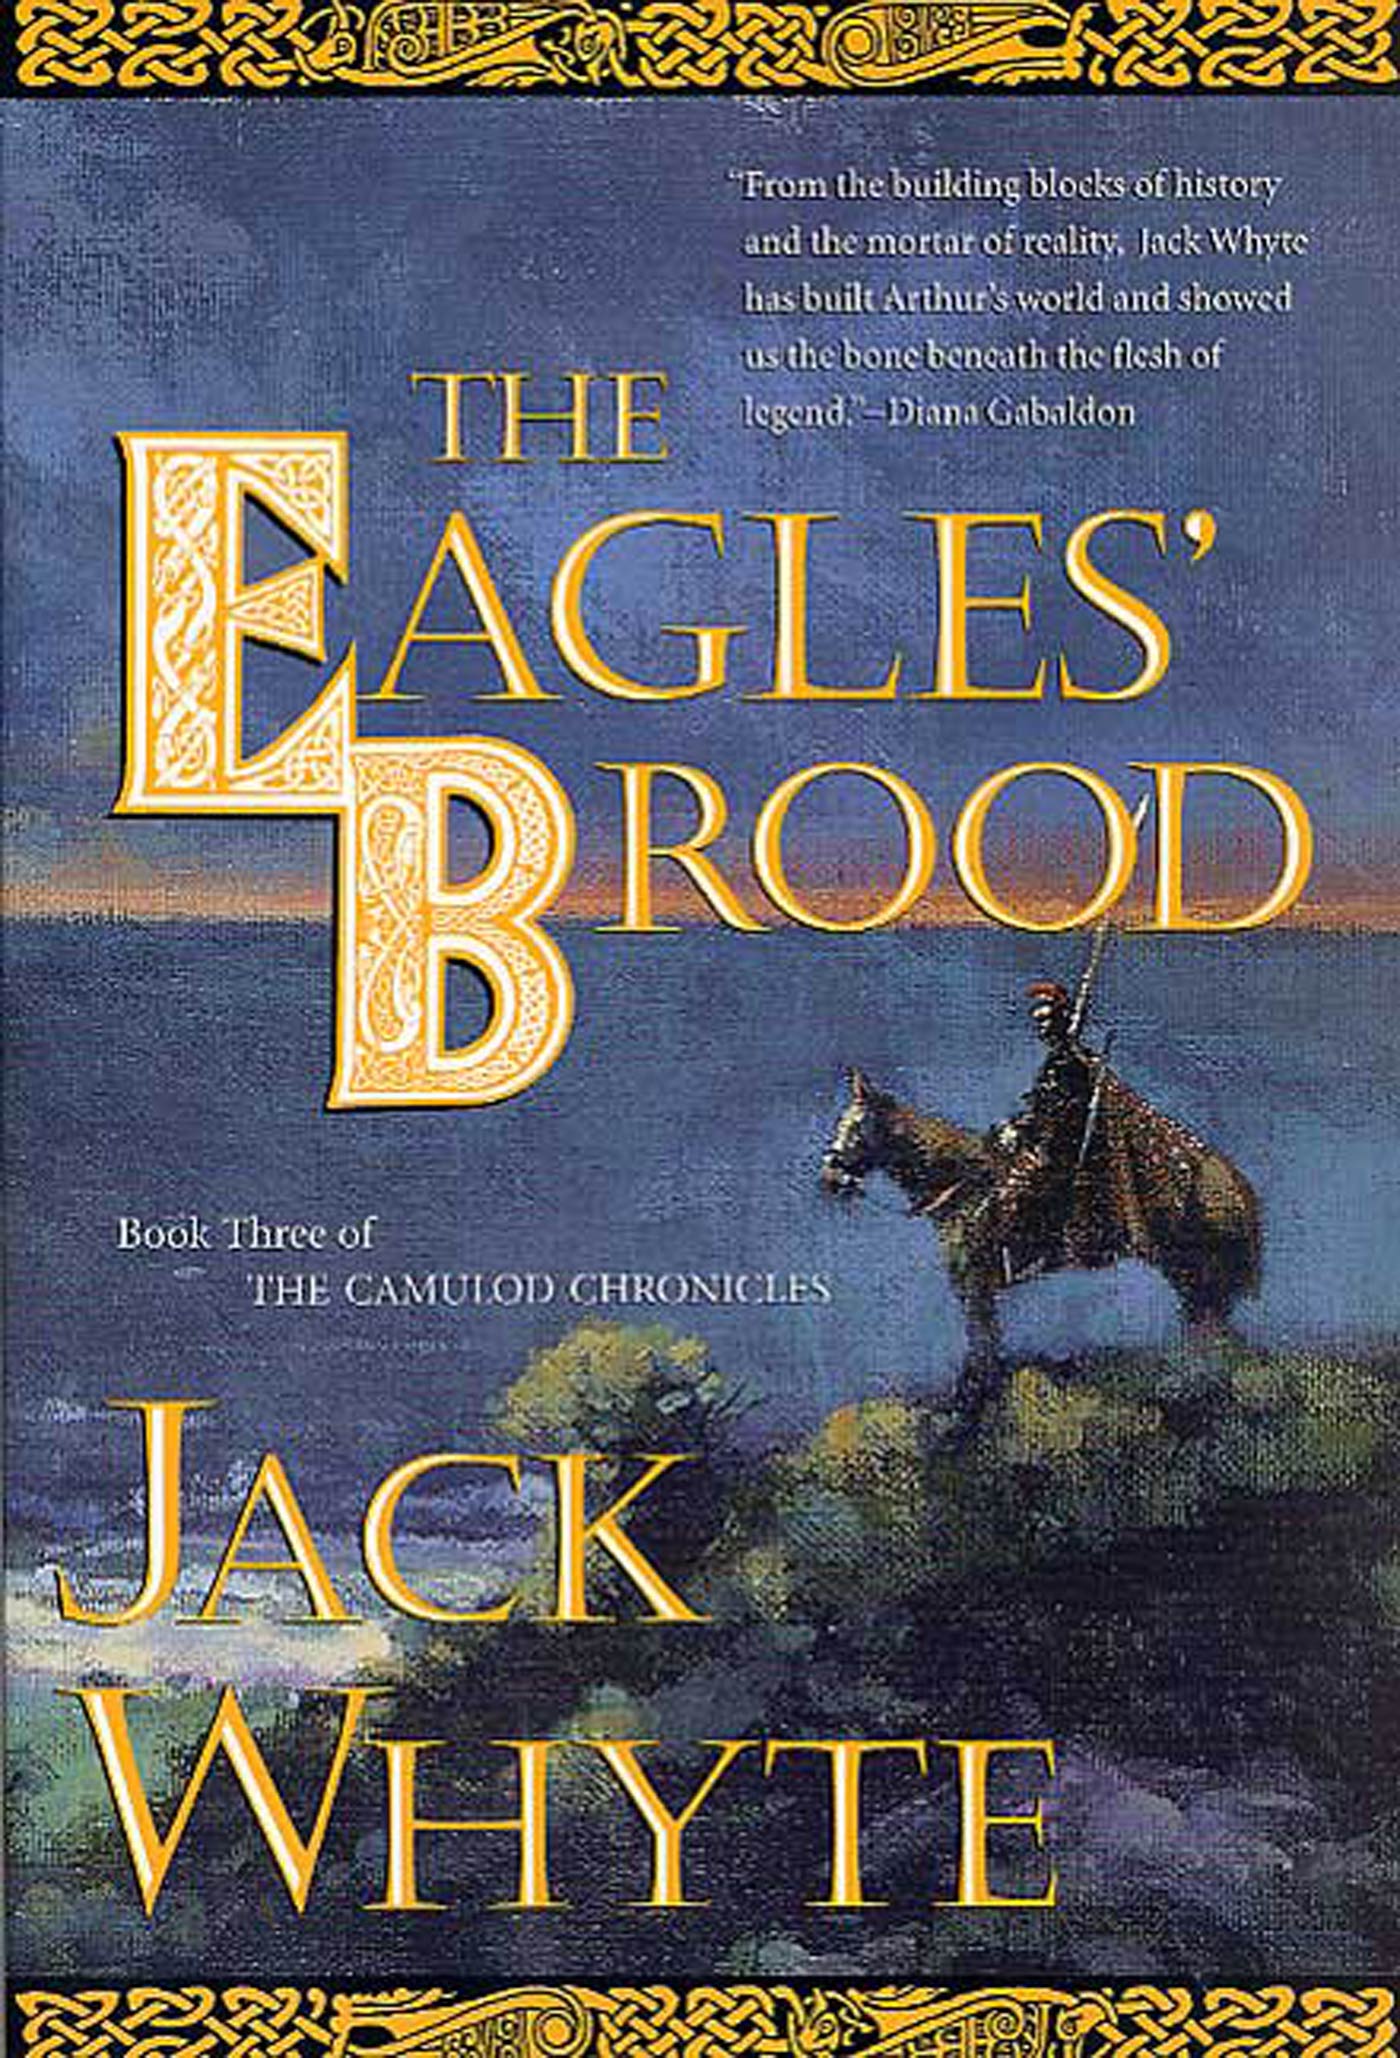 The Eagles' Brood : Book Three of The Camulod Chronicles by Jack Whyte